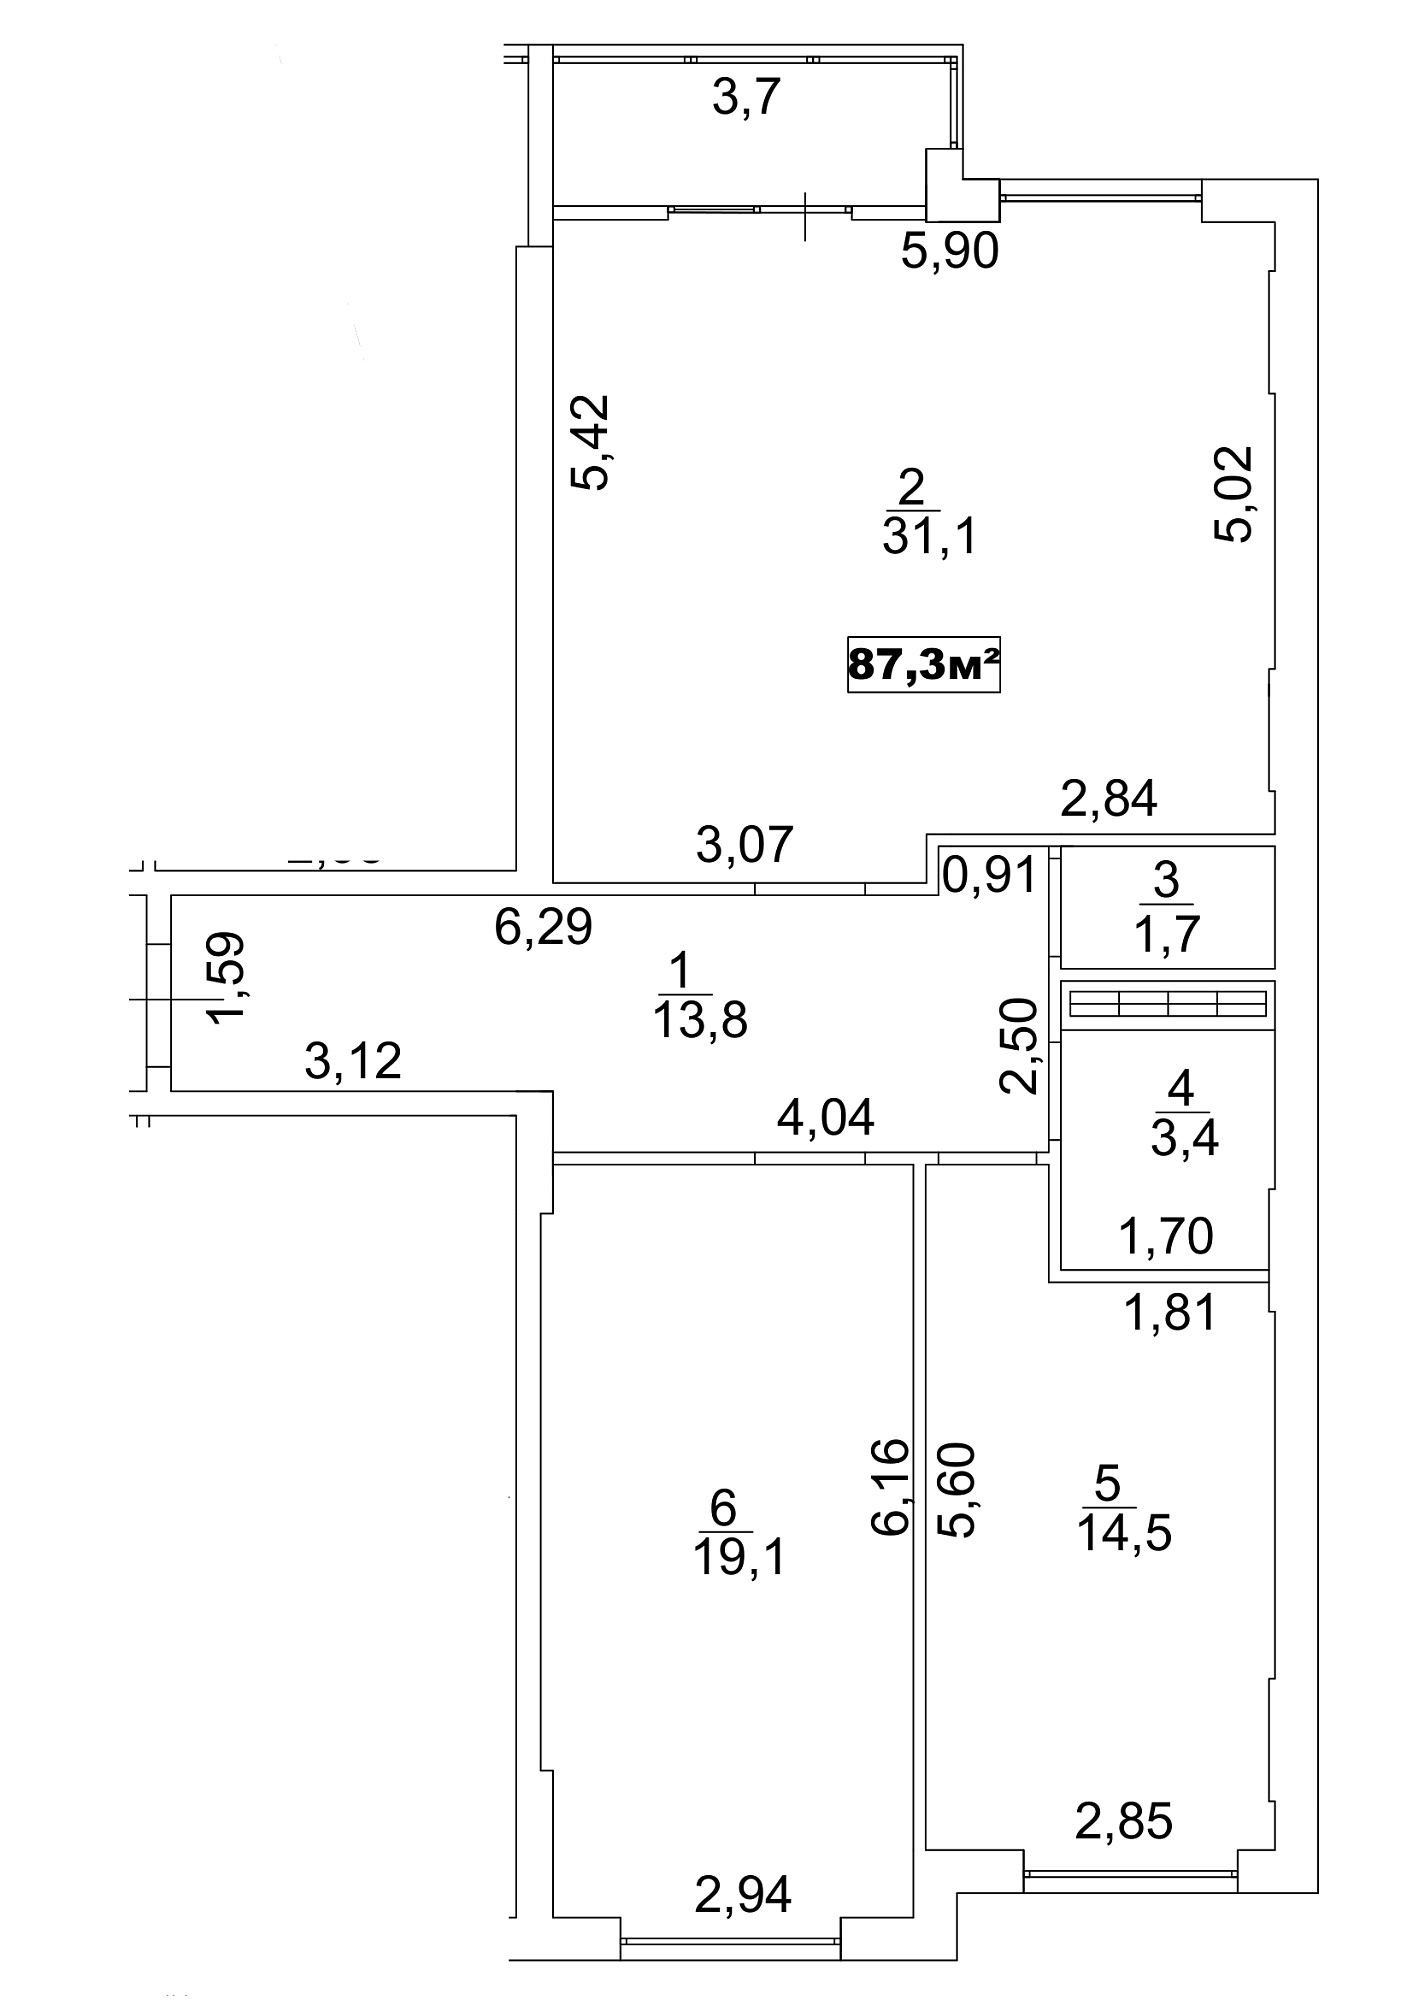 Planning 3-rm flats area 87.3m2, AB-13-06/00049.